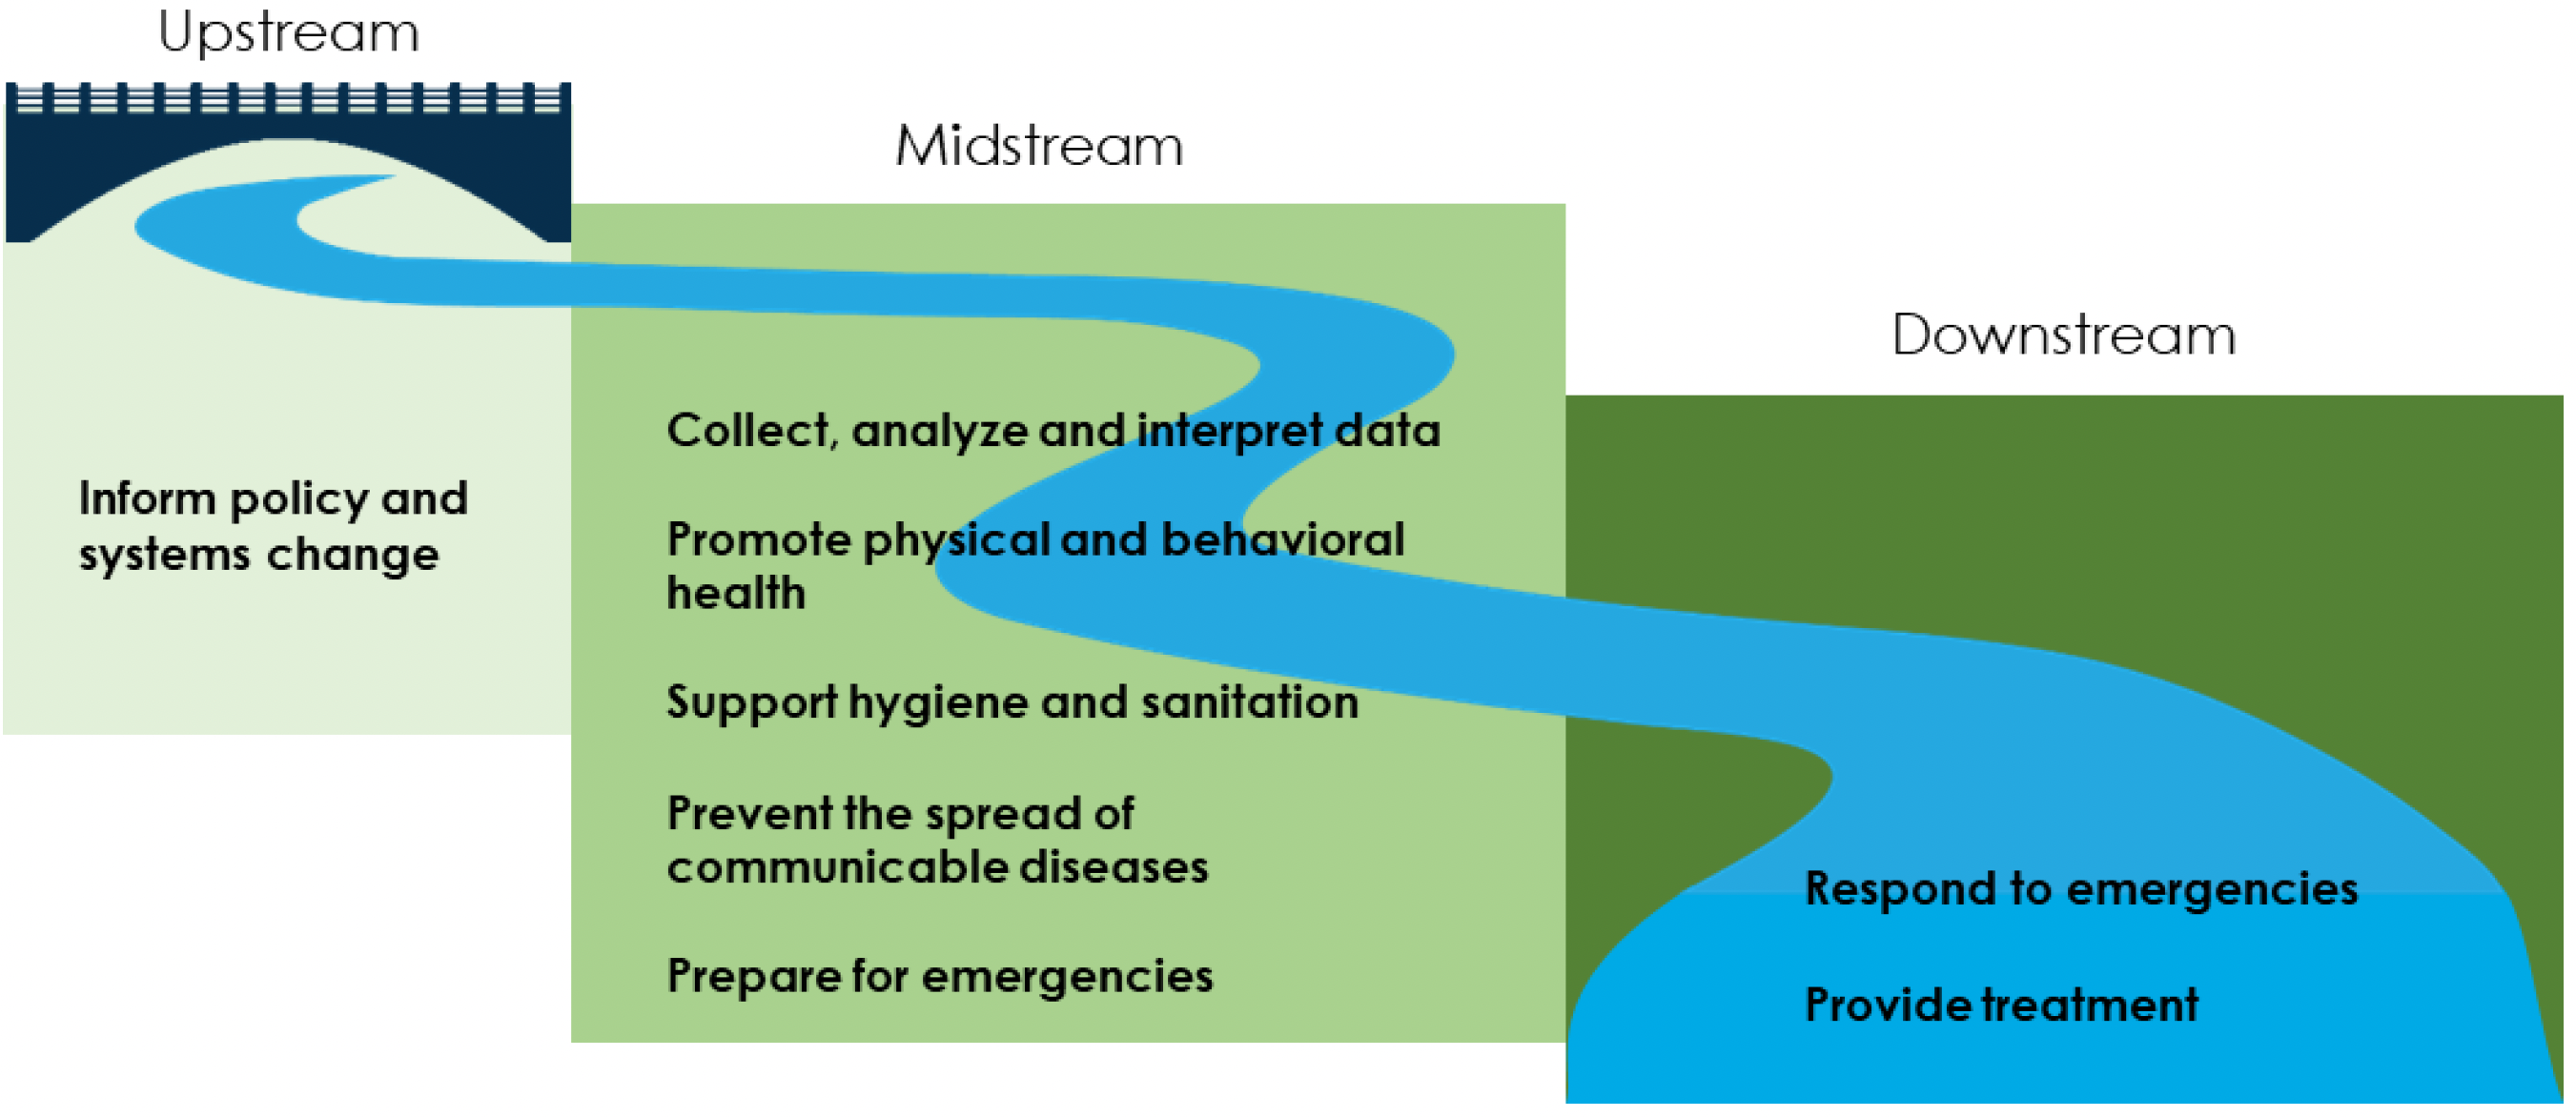 Diagram addressing causes and impacts of poor health among people living homeless